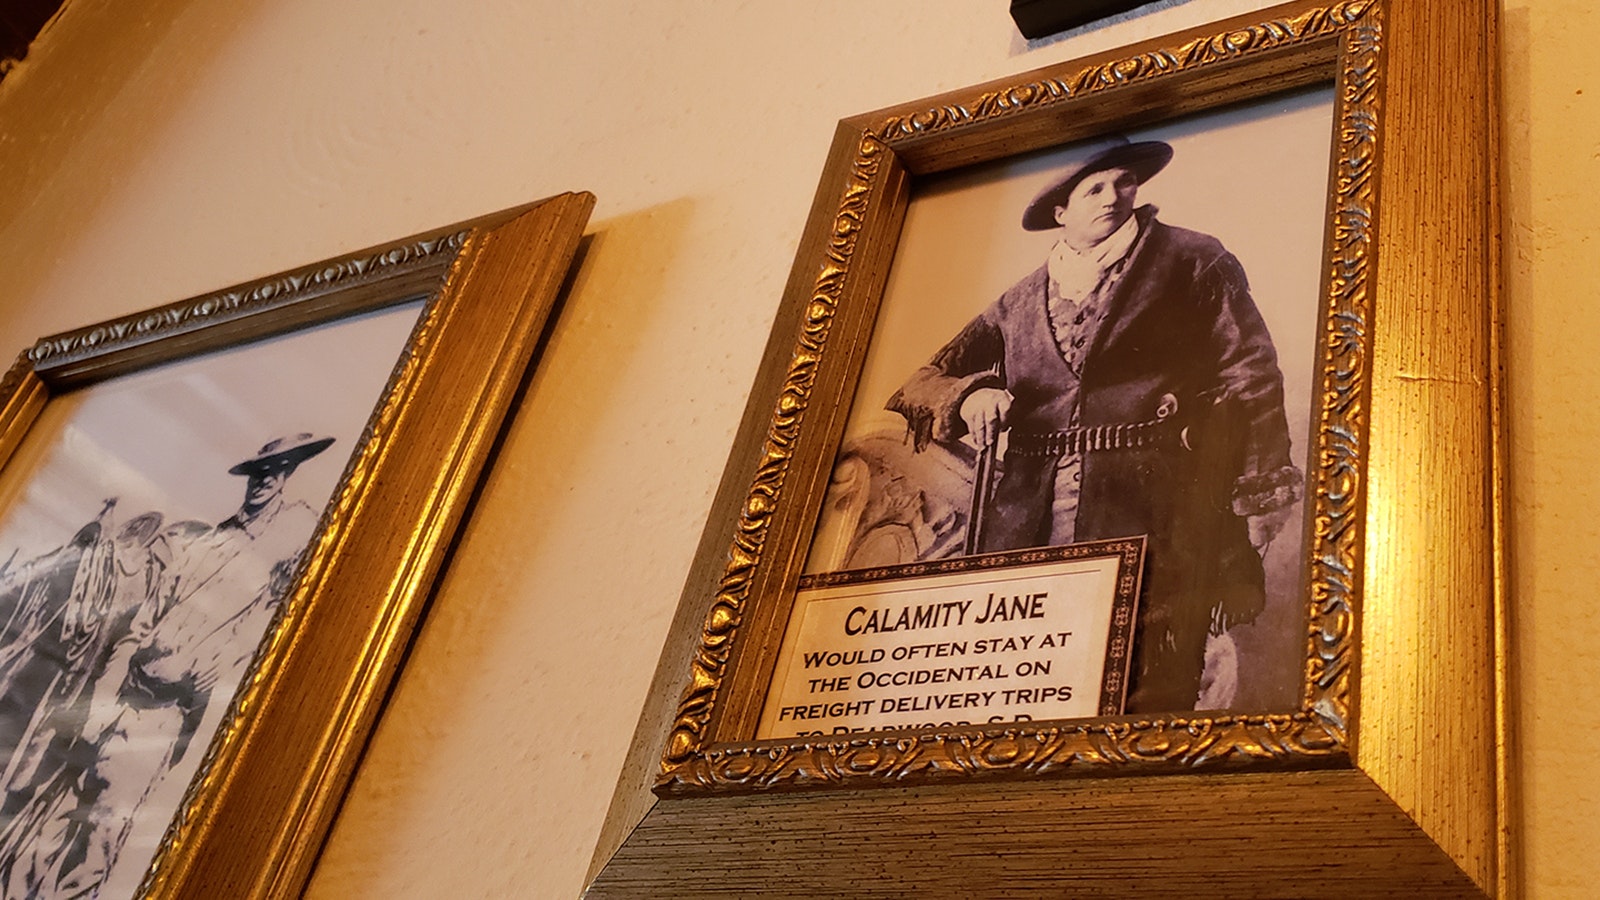 Calamity Jane often stayed at the Occidental when making freight delivery trips.